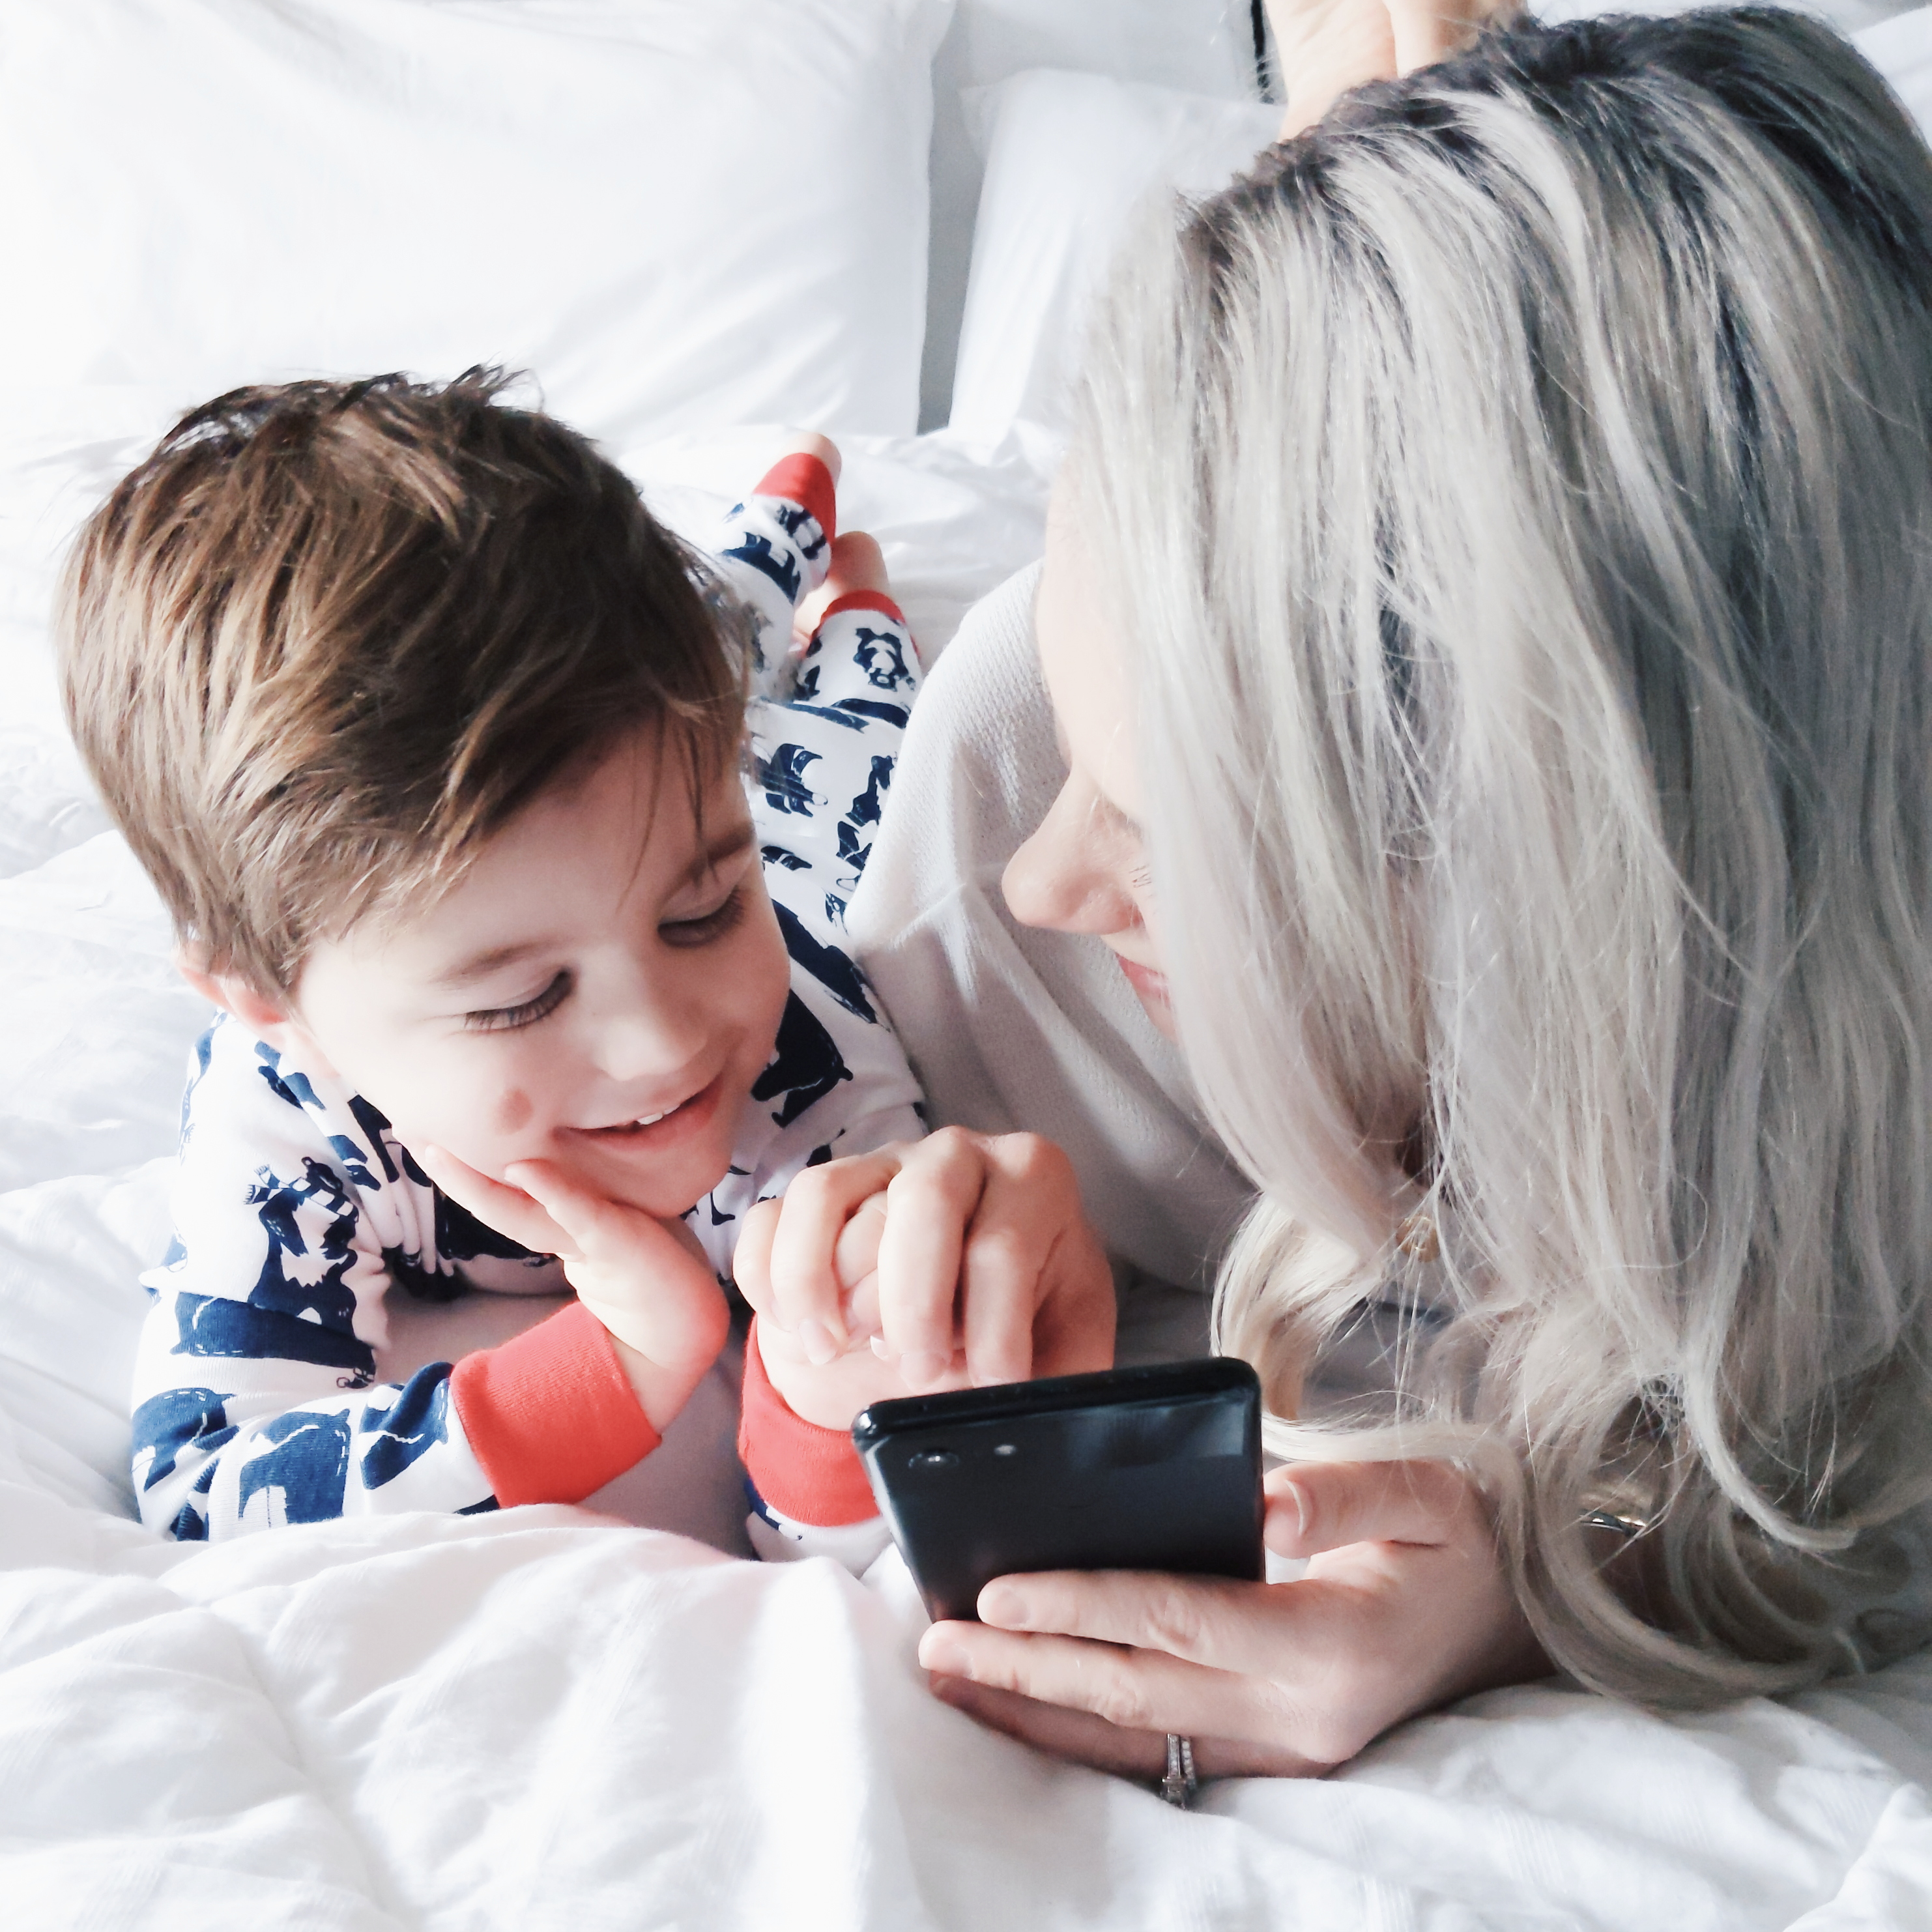 Winter Break Style + Tech: Winter break is here and I'm trying to remember how on earth I used to entertain 2 kids before school started. The first thing we decided to do is test out some fun new tech devices from Verizon to get us started on holiday fun! #VerizonHoliday